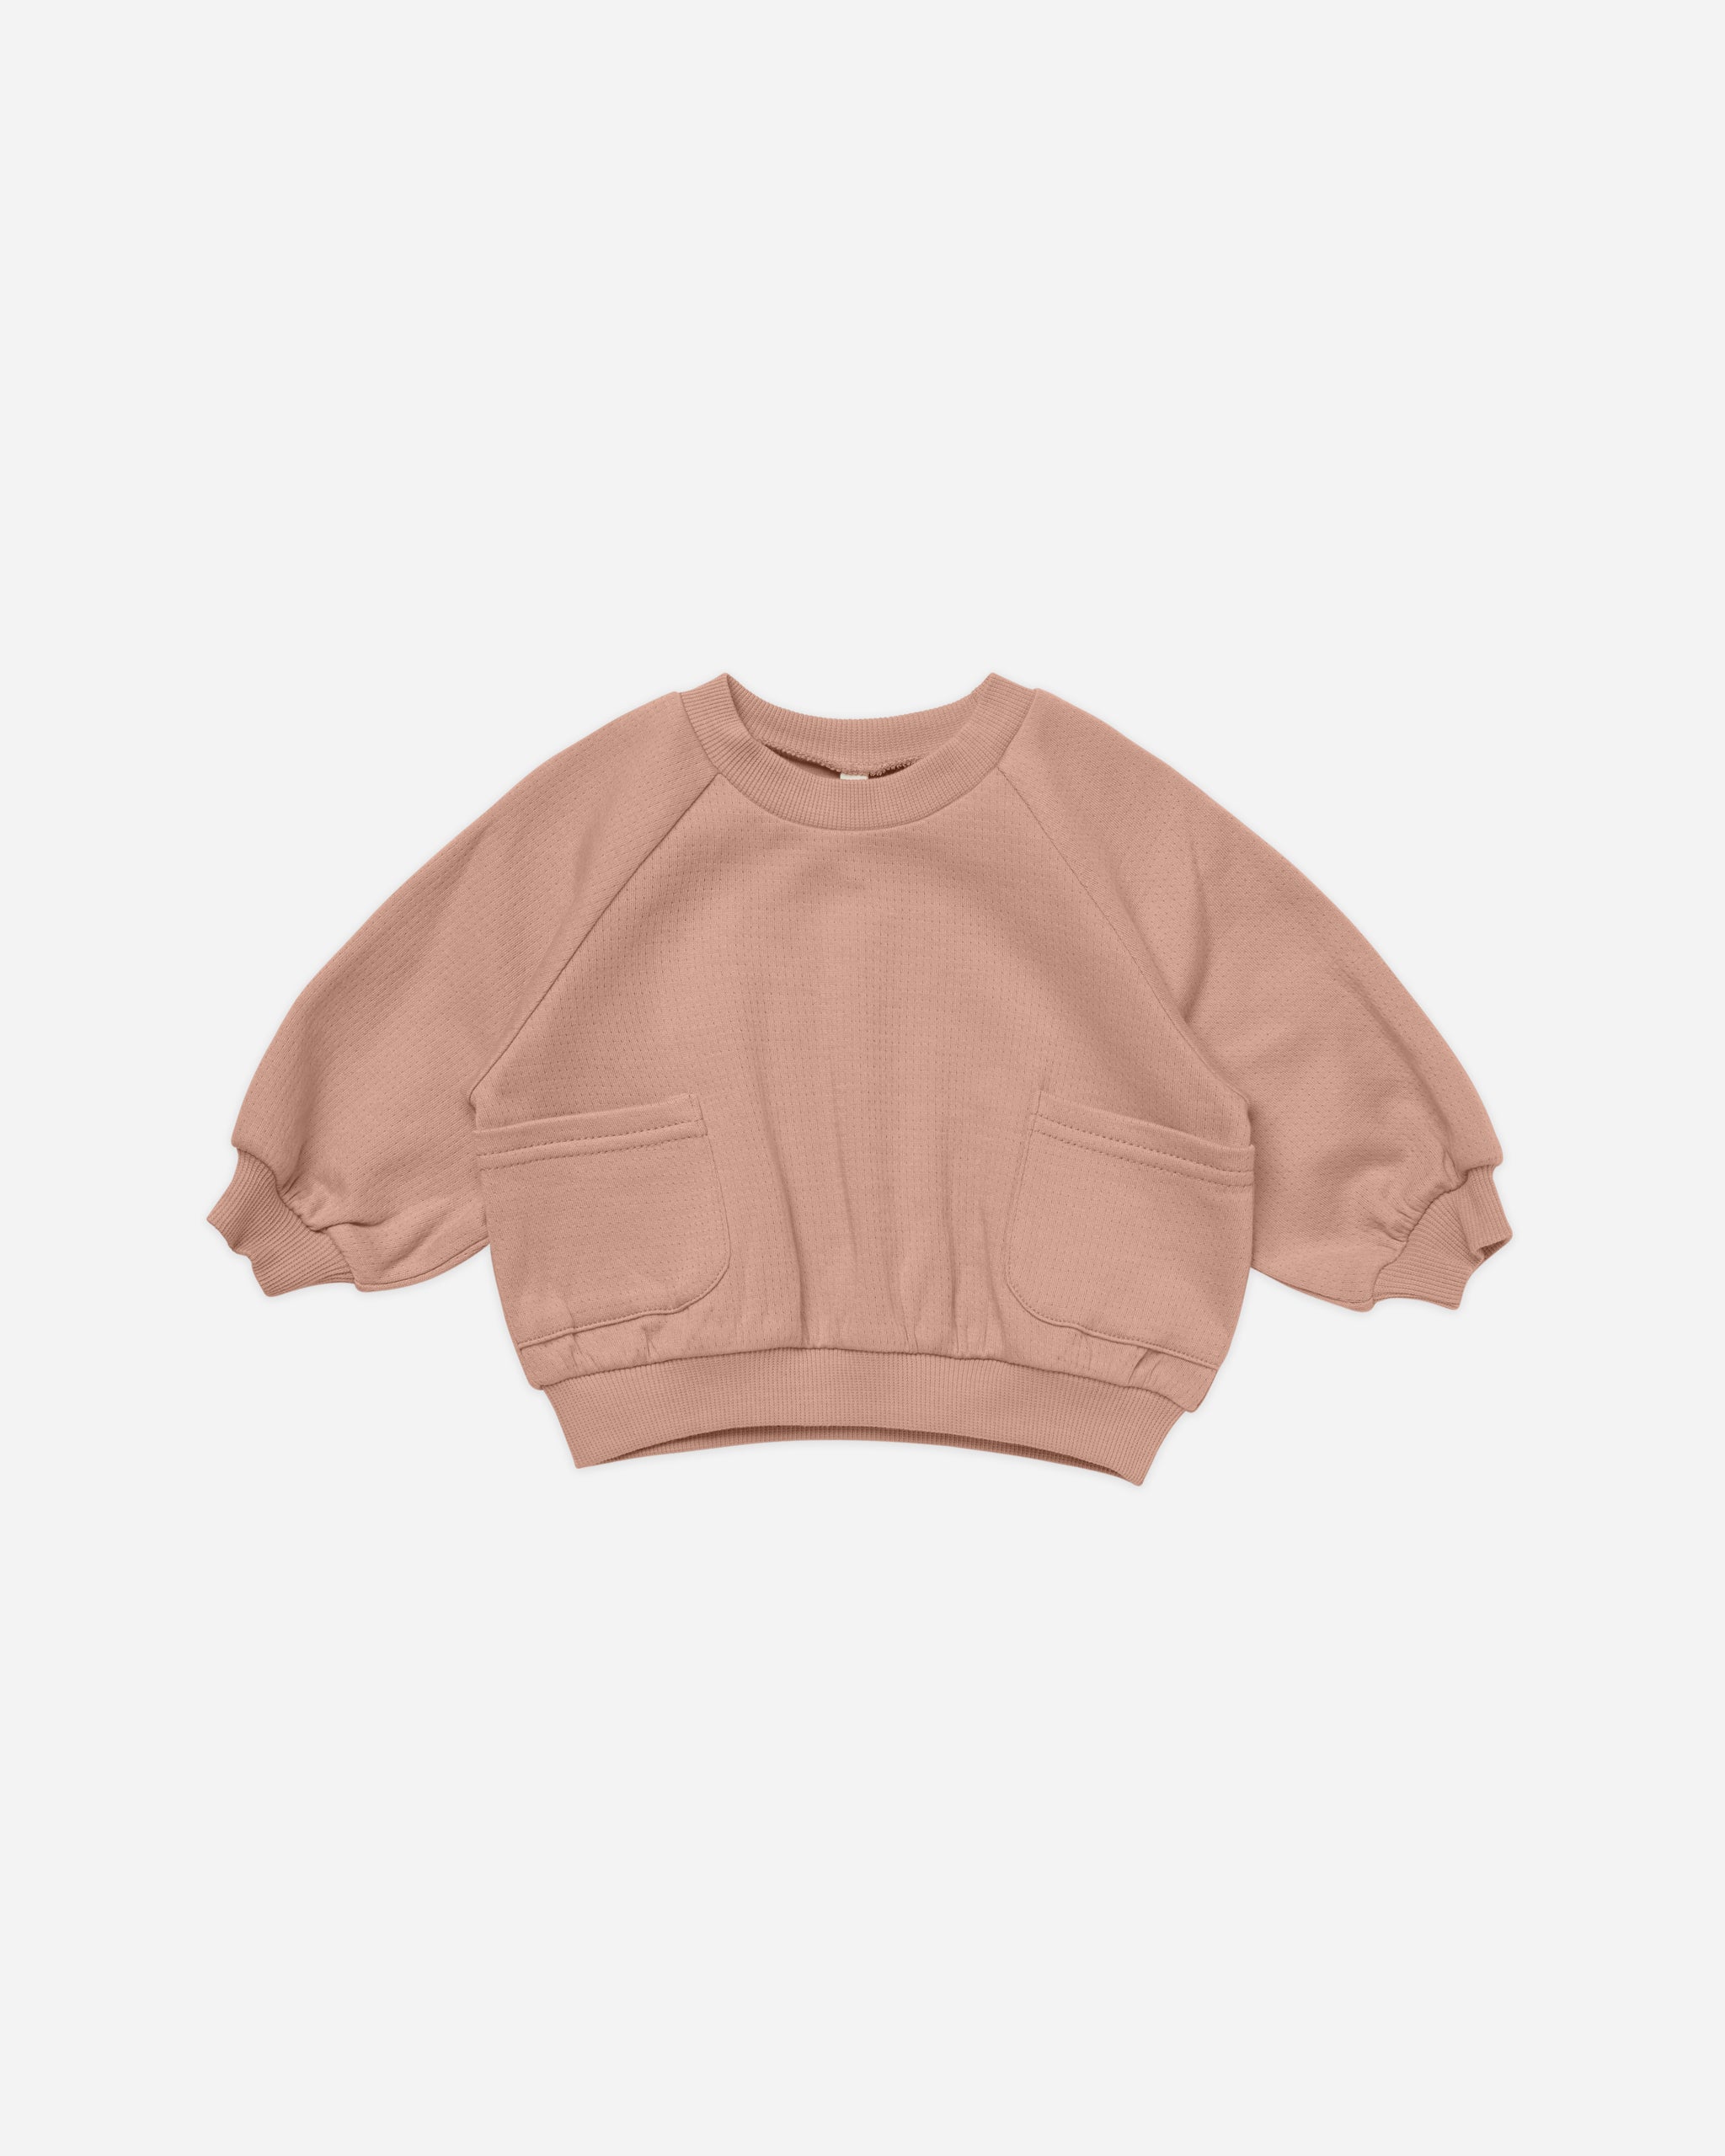 Pocket Sweatshirt || Rose - Rylee + Cru | Kids Clothes | Trendy Baby Clothes | Modern Infant Outfits |